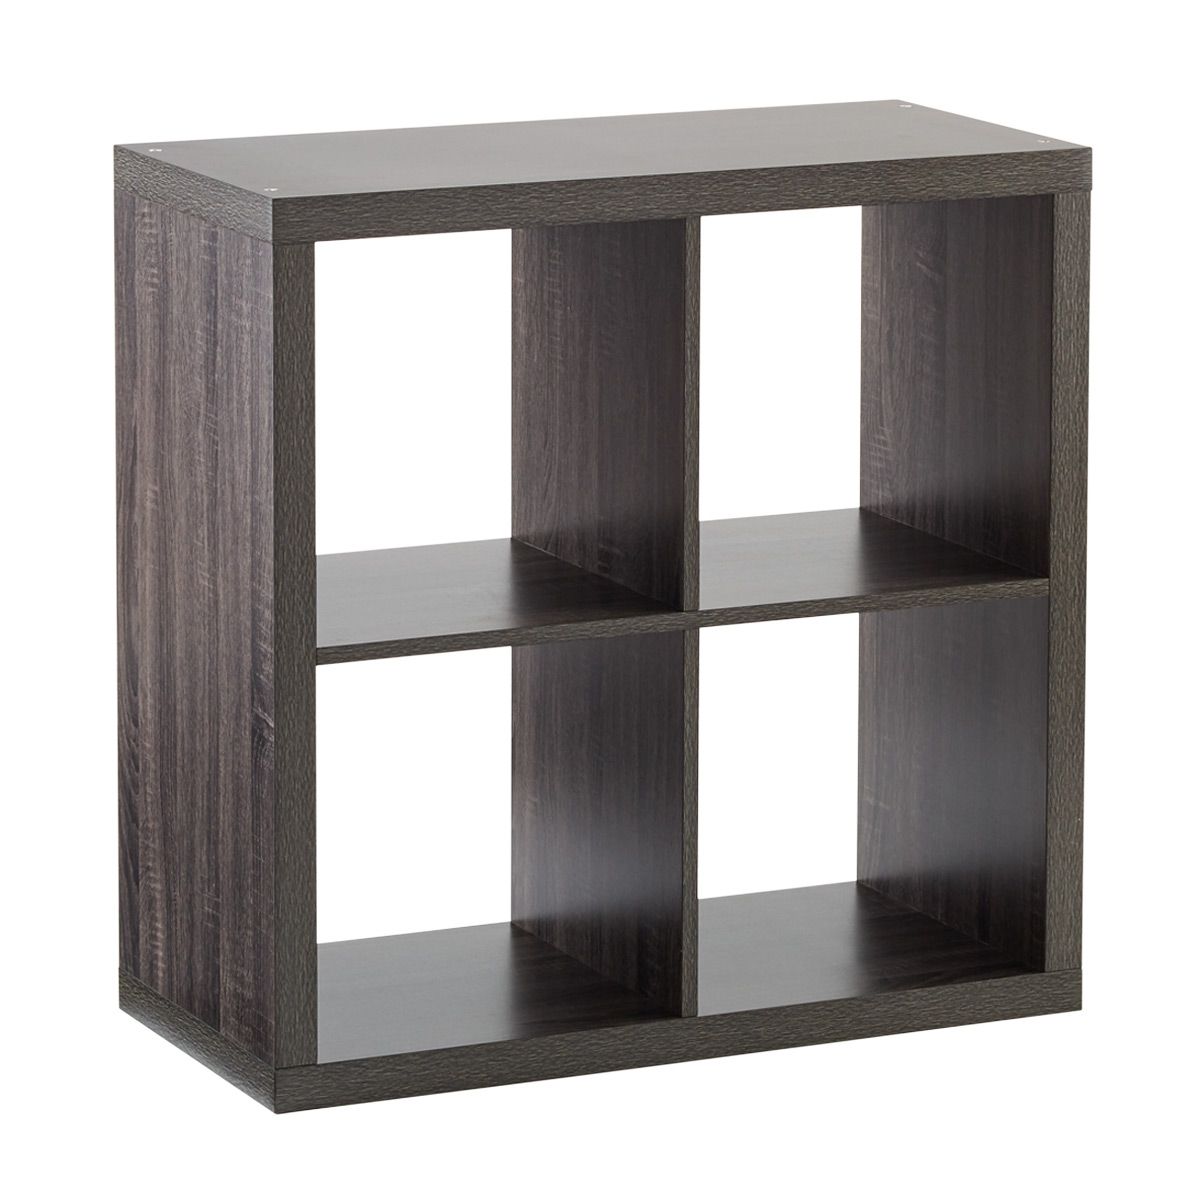 4-Cube Cubby Shelving | The Container Store